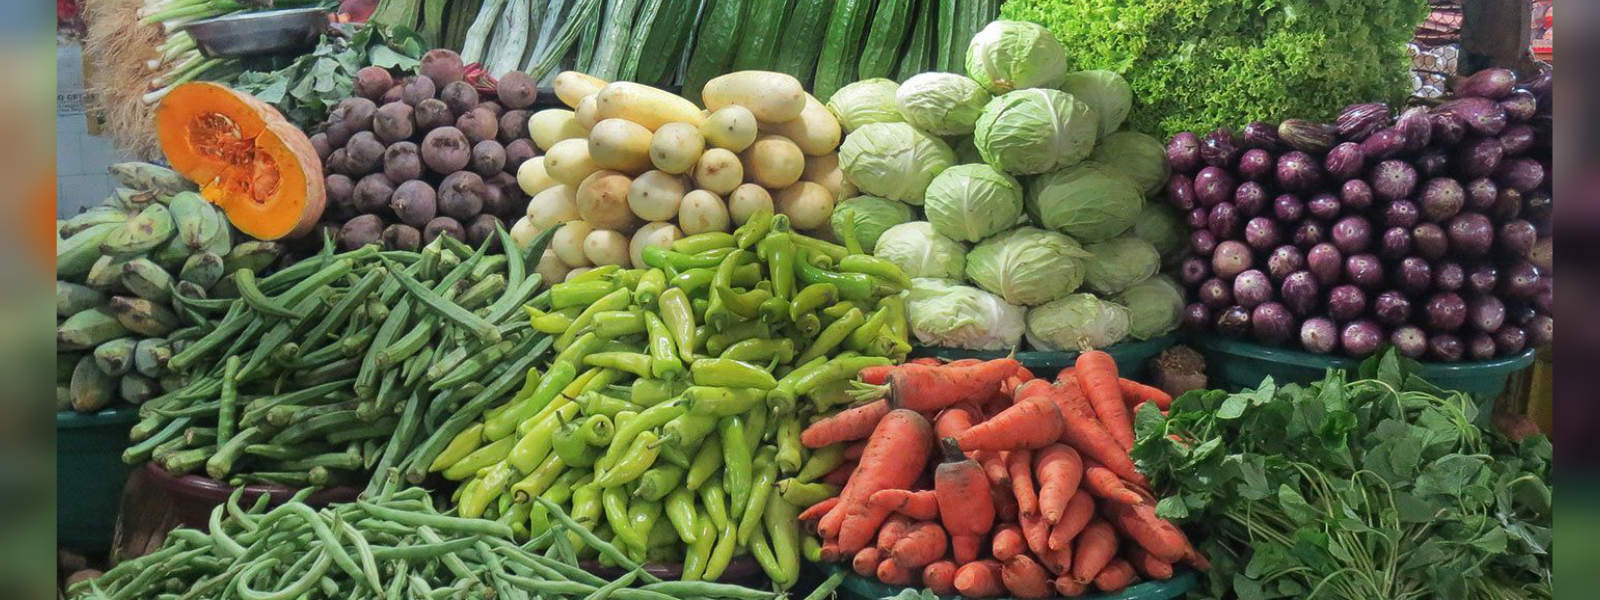 Vegetable prices have risen due to bad weather